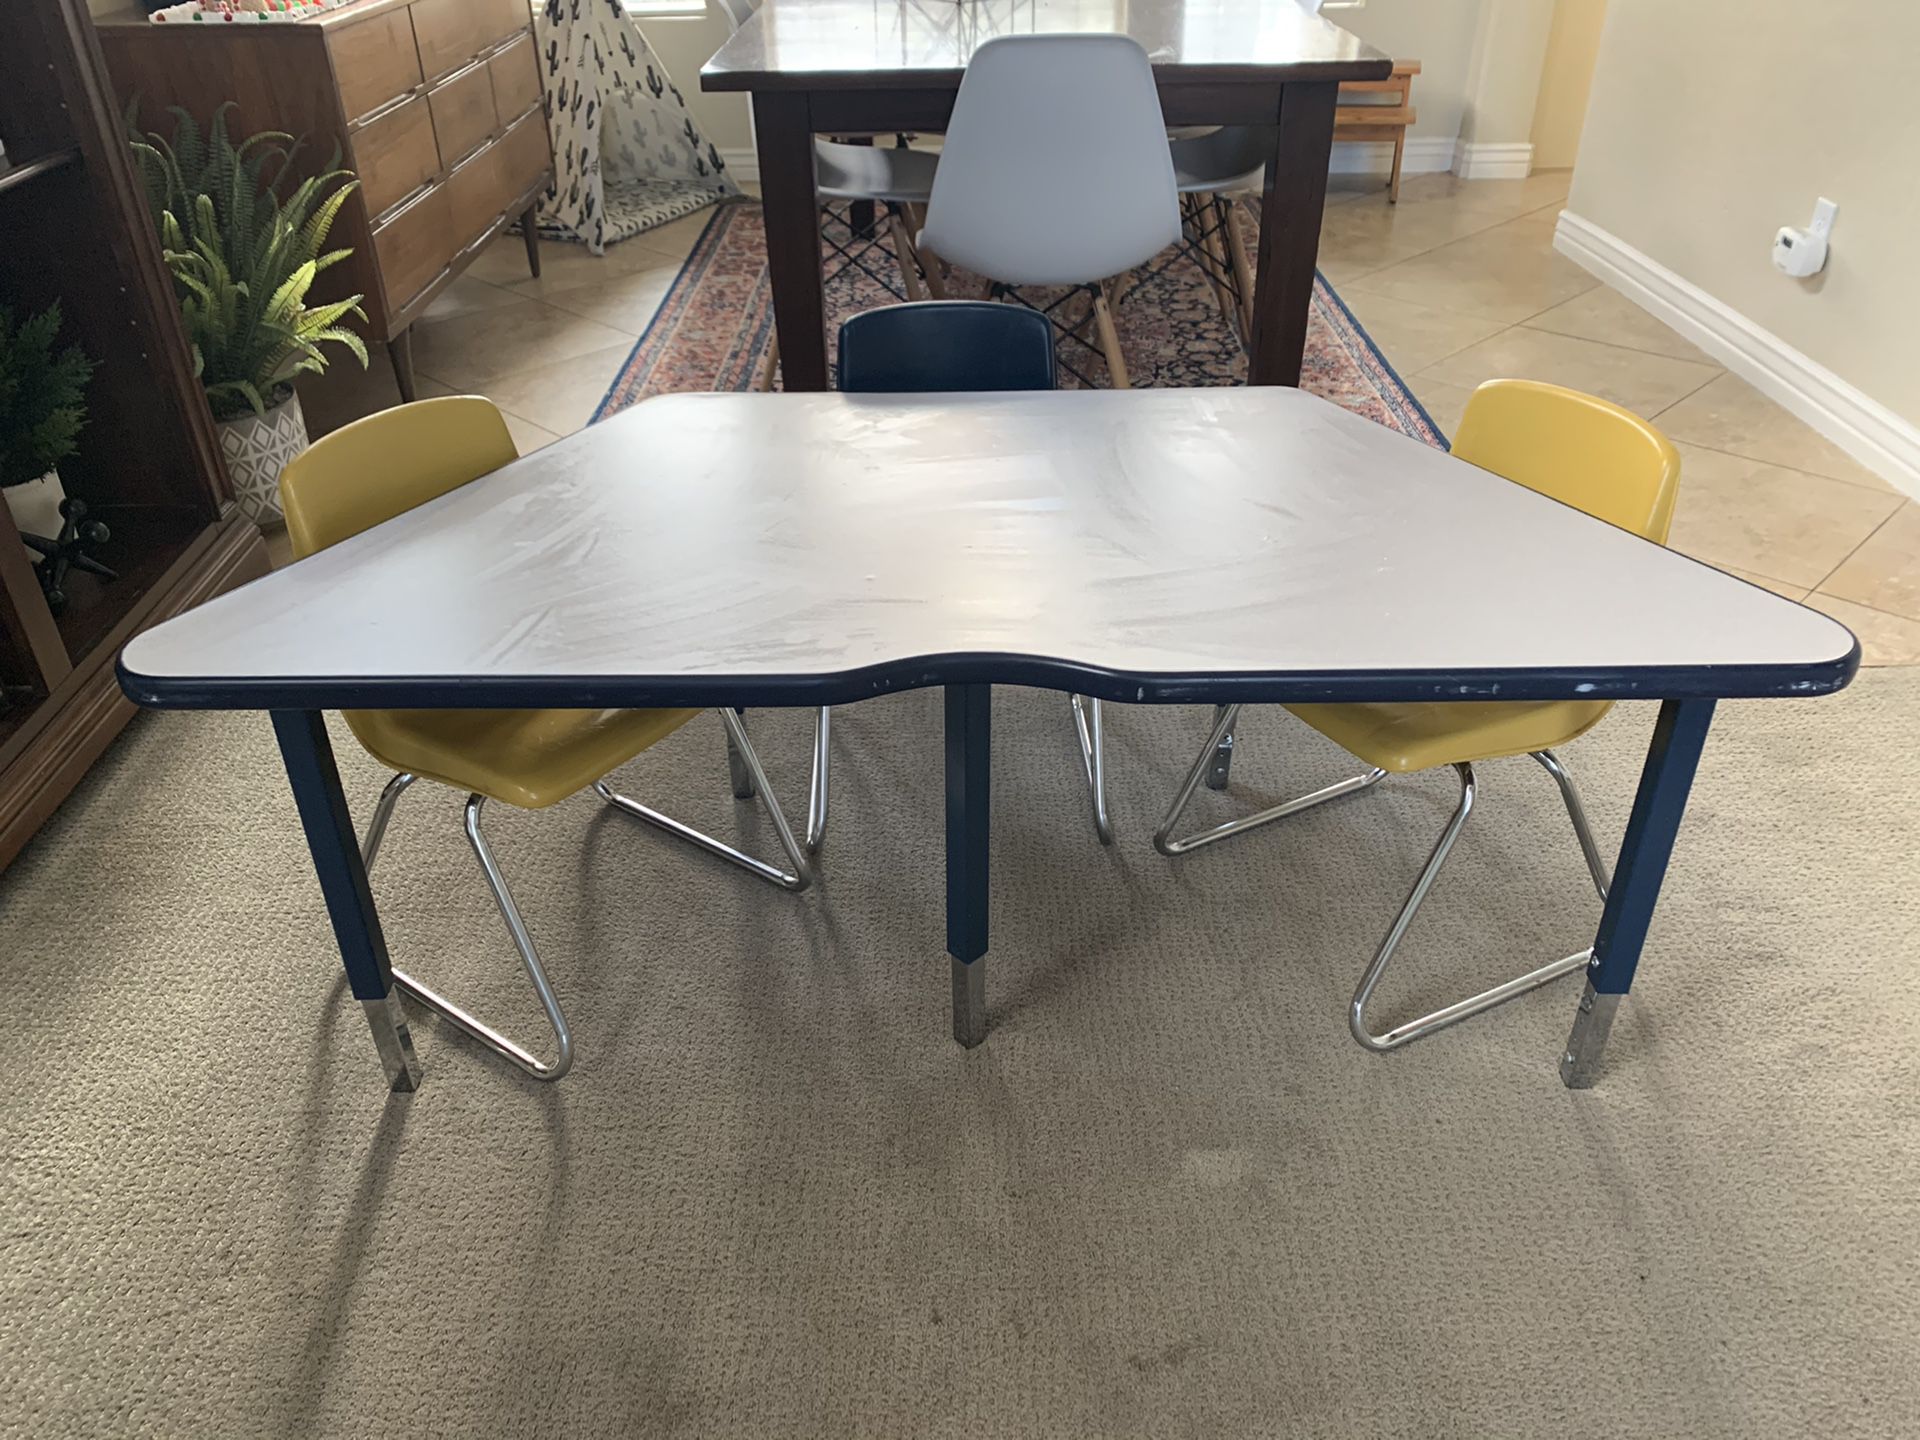 Kid table/desk and 3 chairs